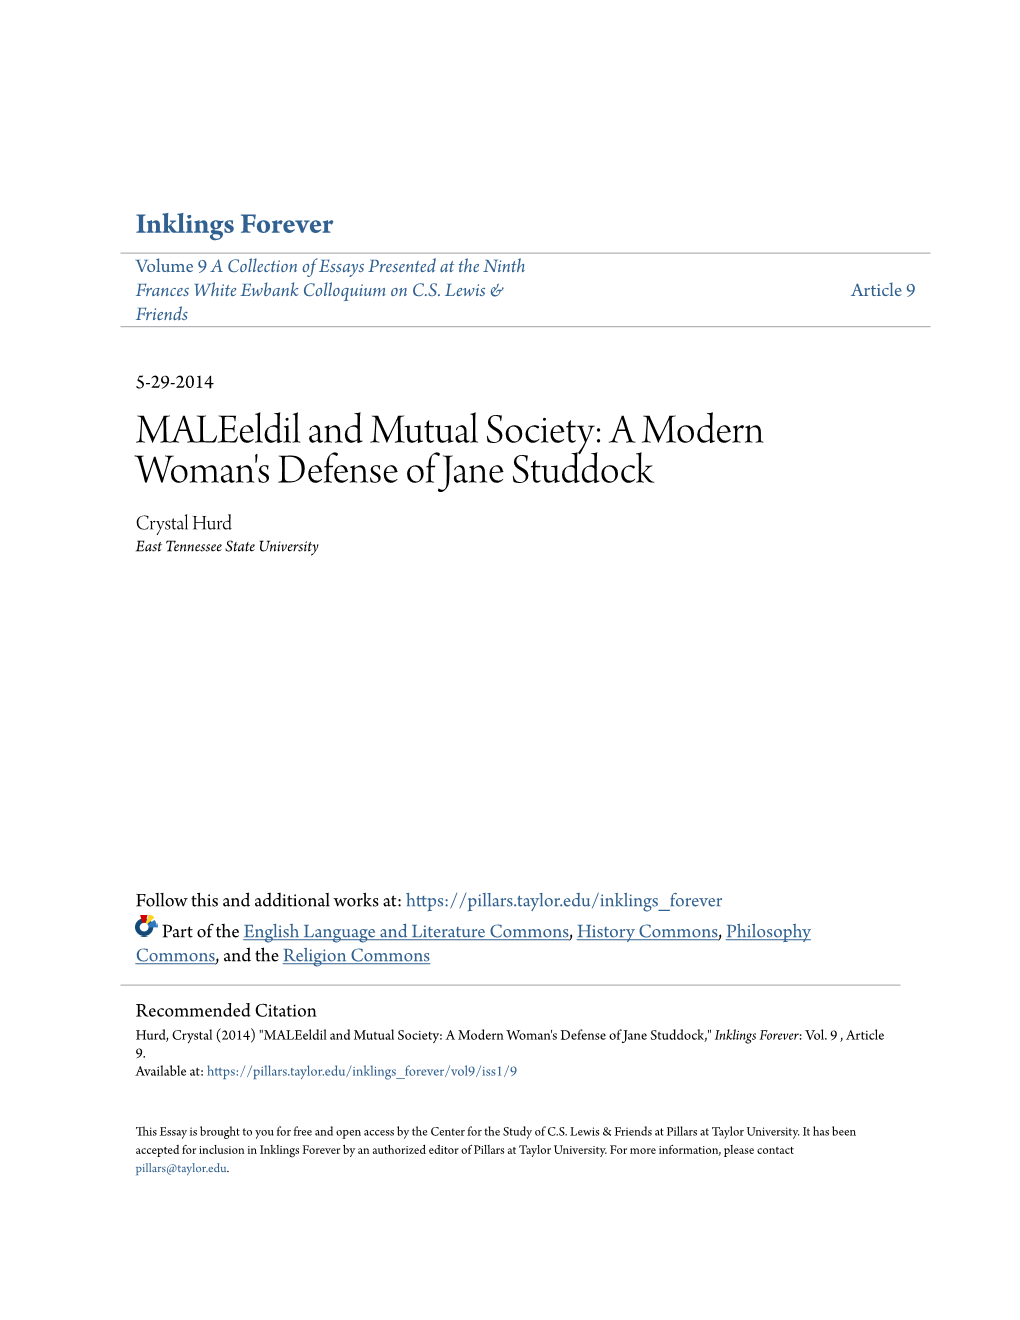 Maleeldil and Mutual Society: a Modern Woman's Defense of Jane Studdock Crystal Hurd East Tennessee State University